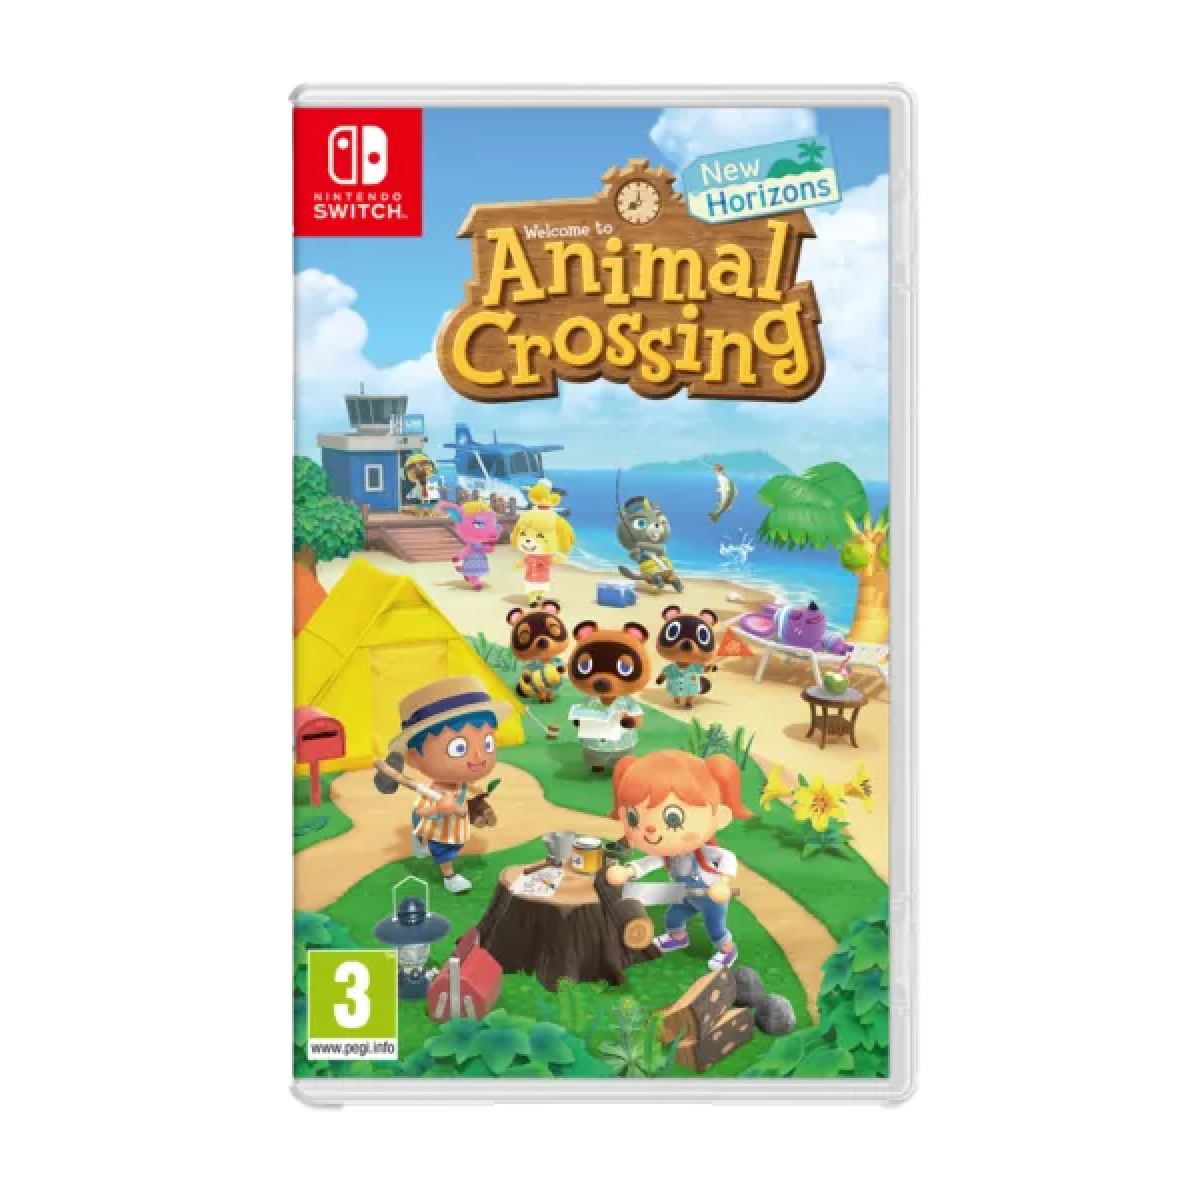 Animal Crossing game for the intendo Switch